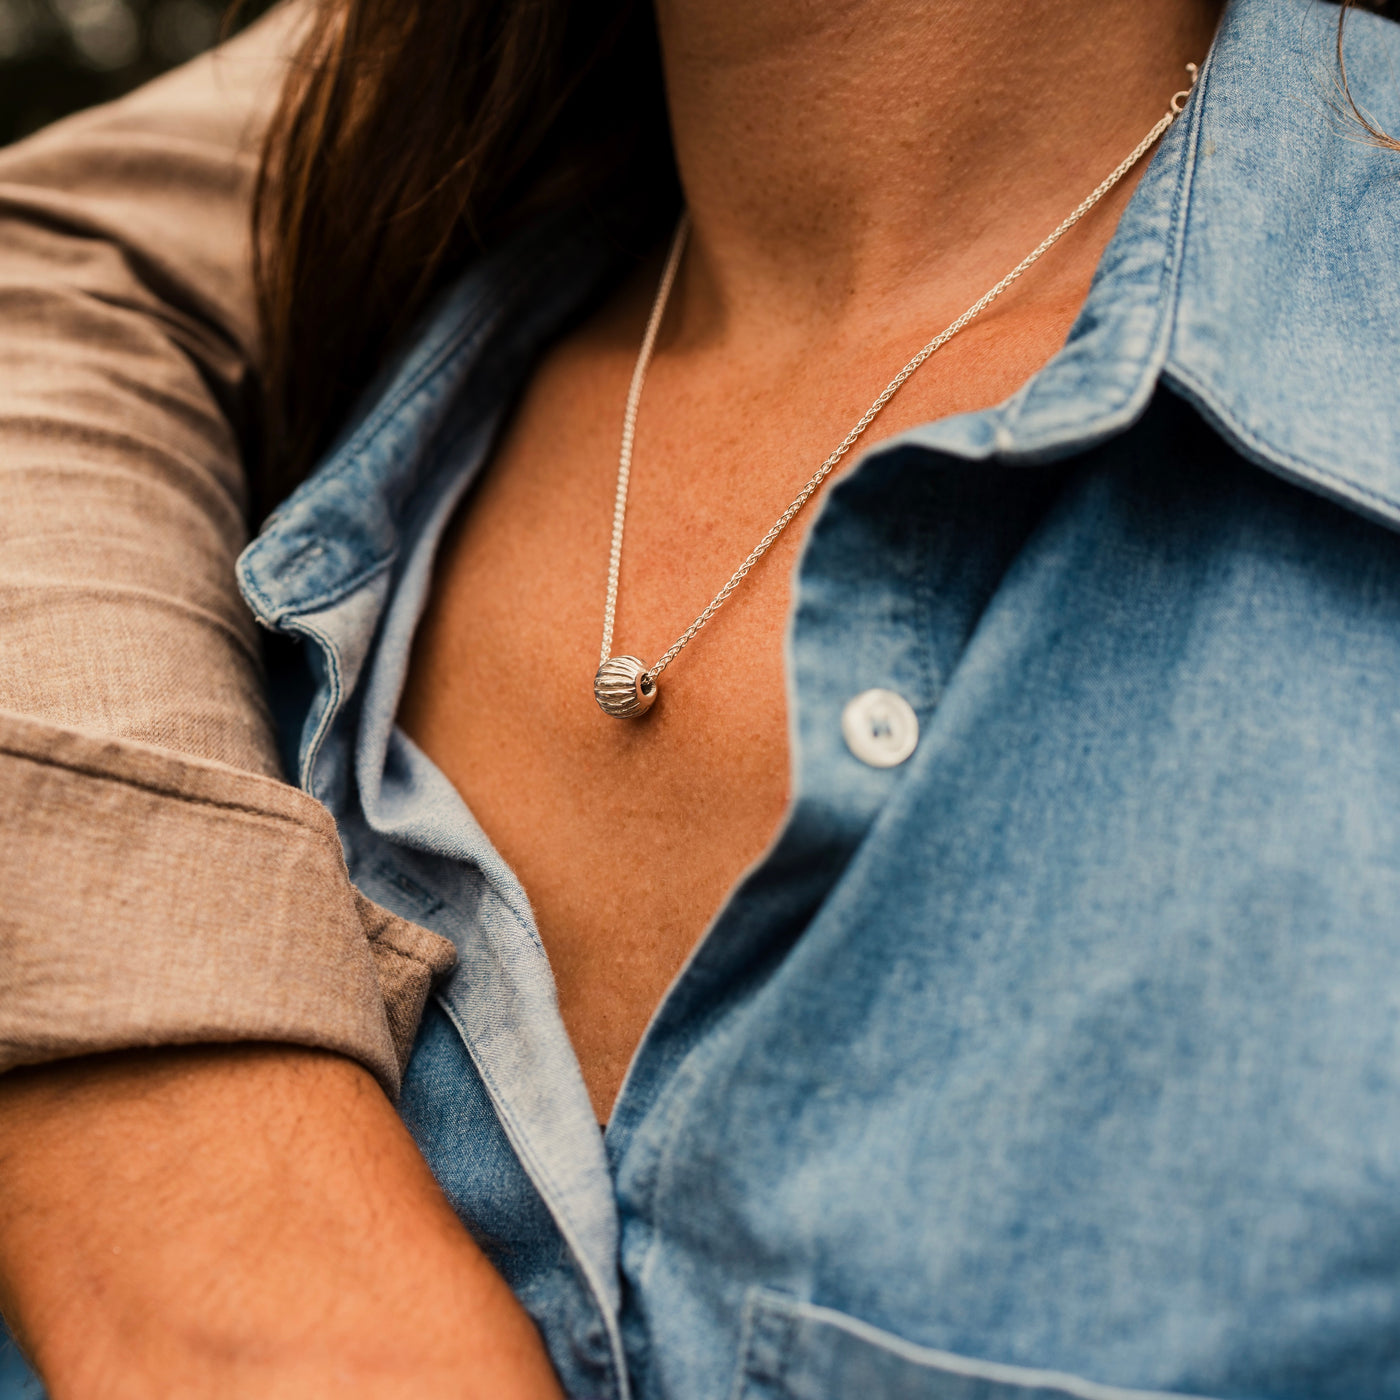 A sterling silver Melon bead threaded onto a silver chunky spiga chain worn by a woman wearing a denim shirt and brown hair, a man's arm in a brown shirt is over her shoulder. Handmade in Corbridge at Kirsty Taylor Goldsmiths